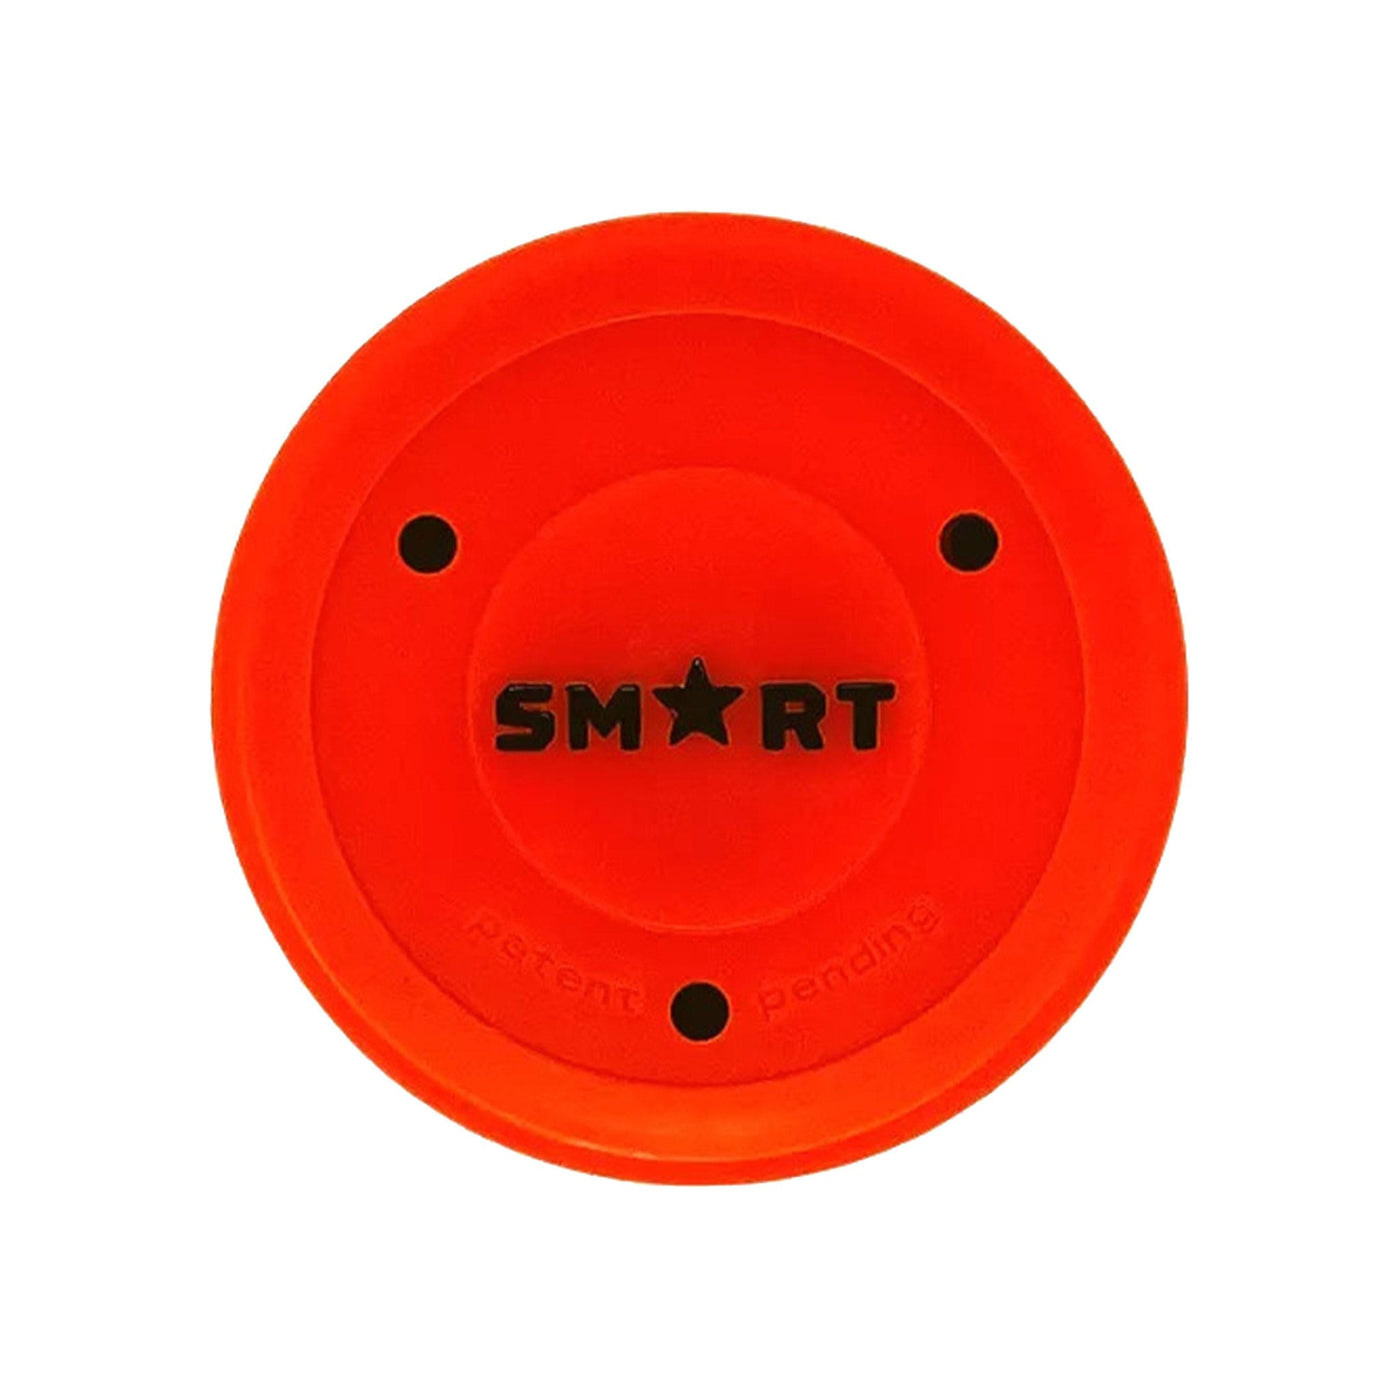 Bright orange training puck weighing 6 ounces used for both stickhandling and shooting. Skills training, skills puck, training puck, smart puck.